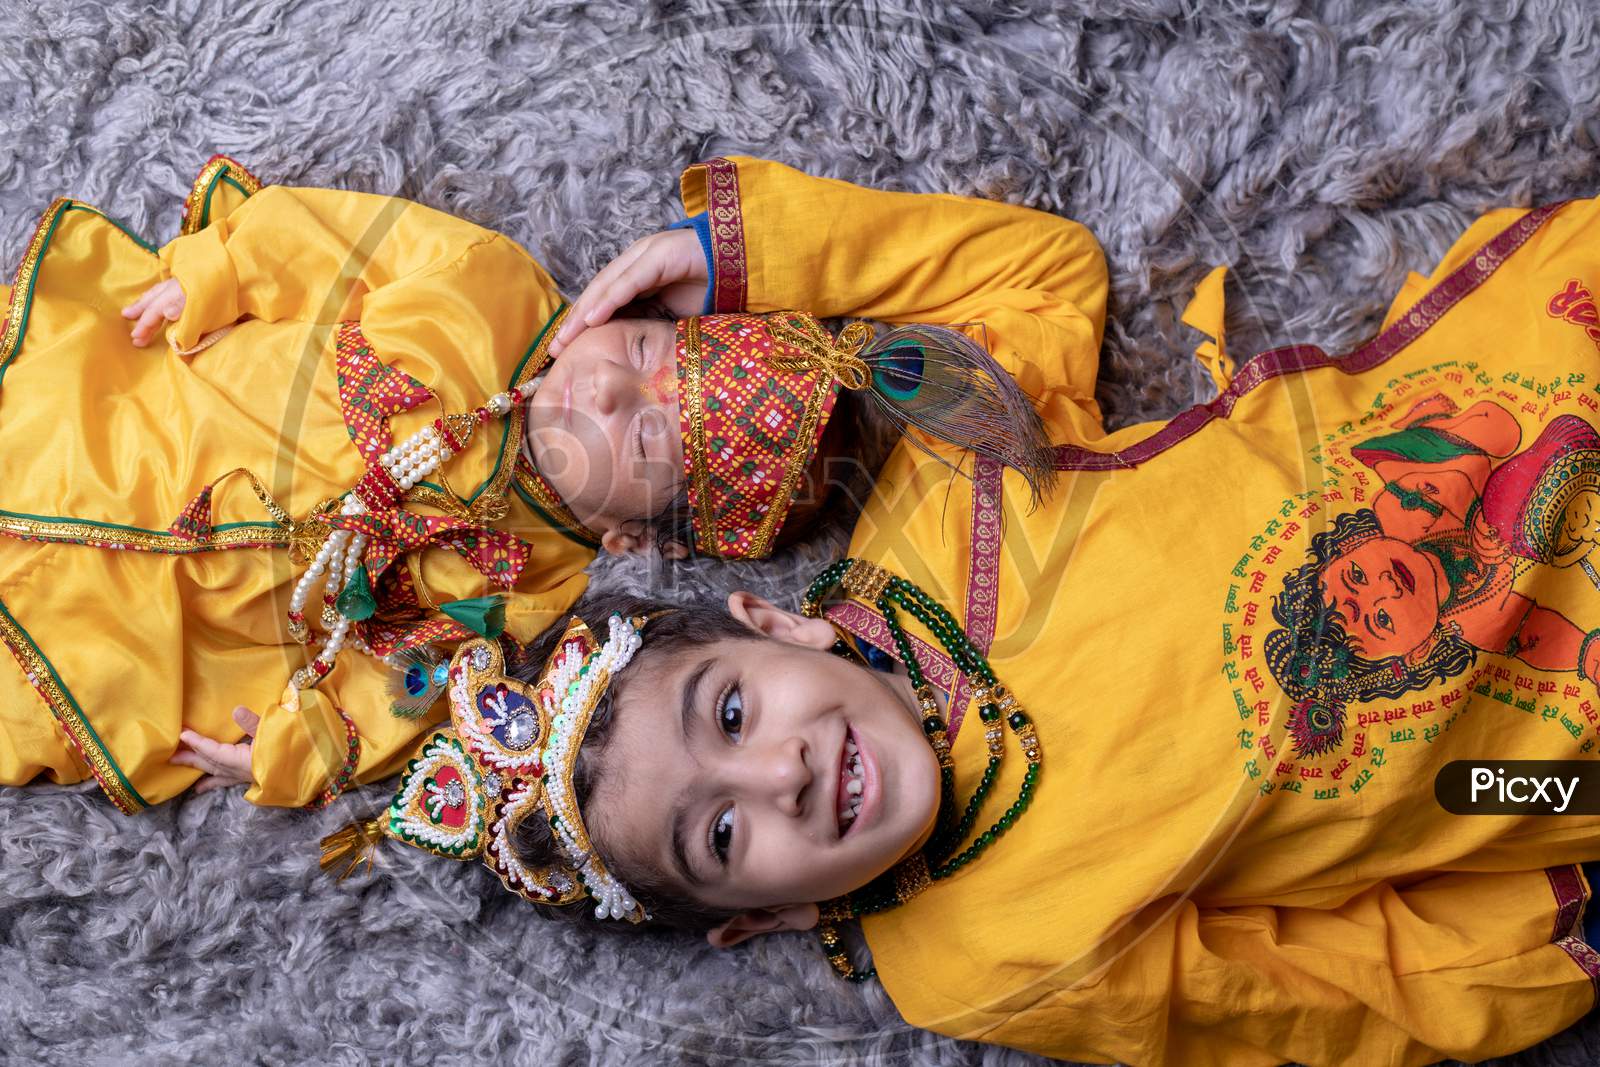 Young Indian Brothers Or Siblings Dressed Like Lord Sri Krishna And Posing Over A Gray Background